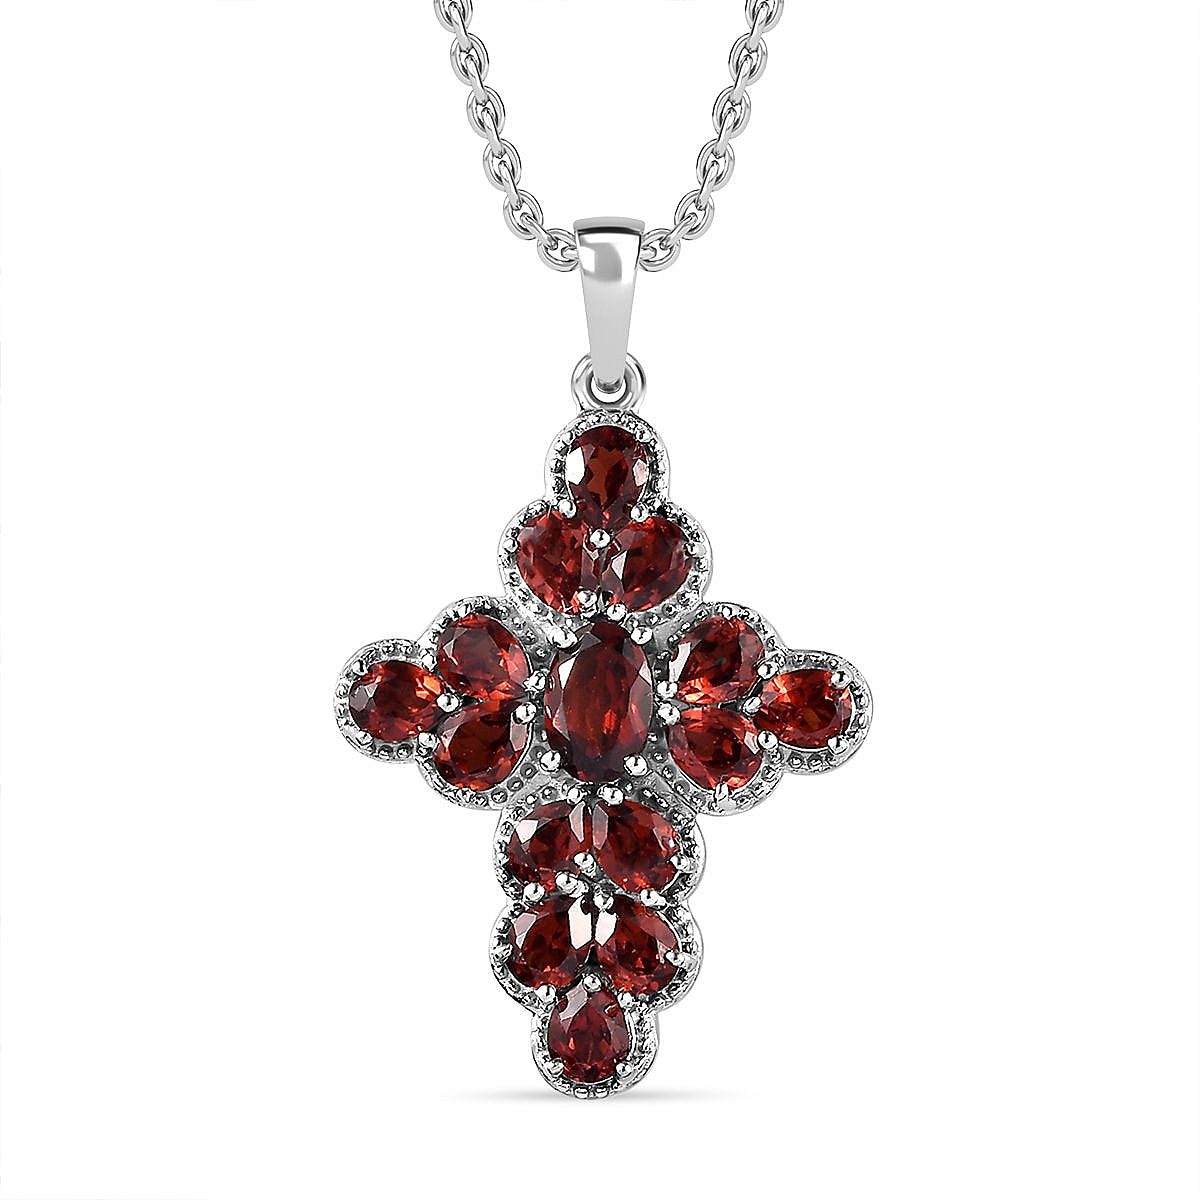 Red Garnet Cross Pendant with Chain (Size 20) in Platinum Overlay Sterling Silver 3.49 Ct, Silver Wt. 5.72 Gms